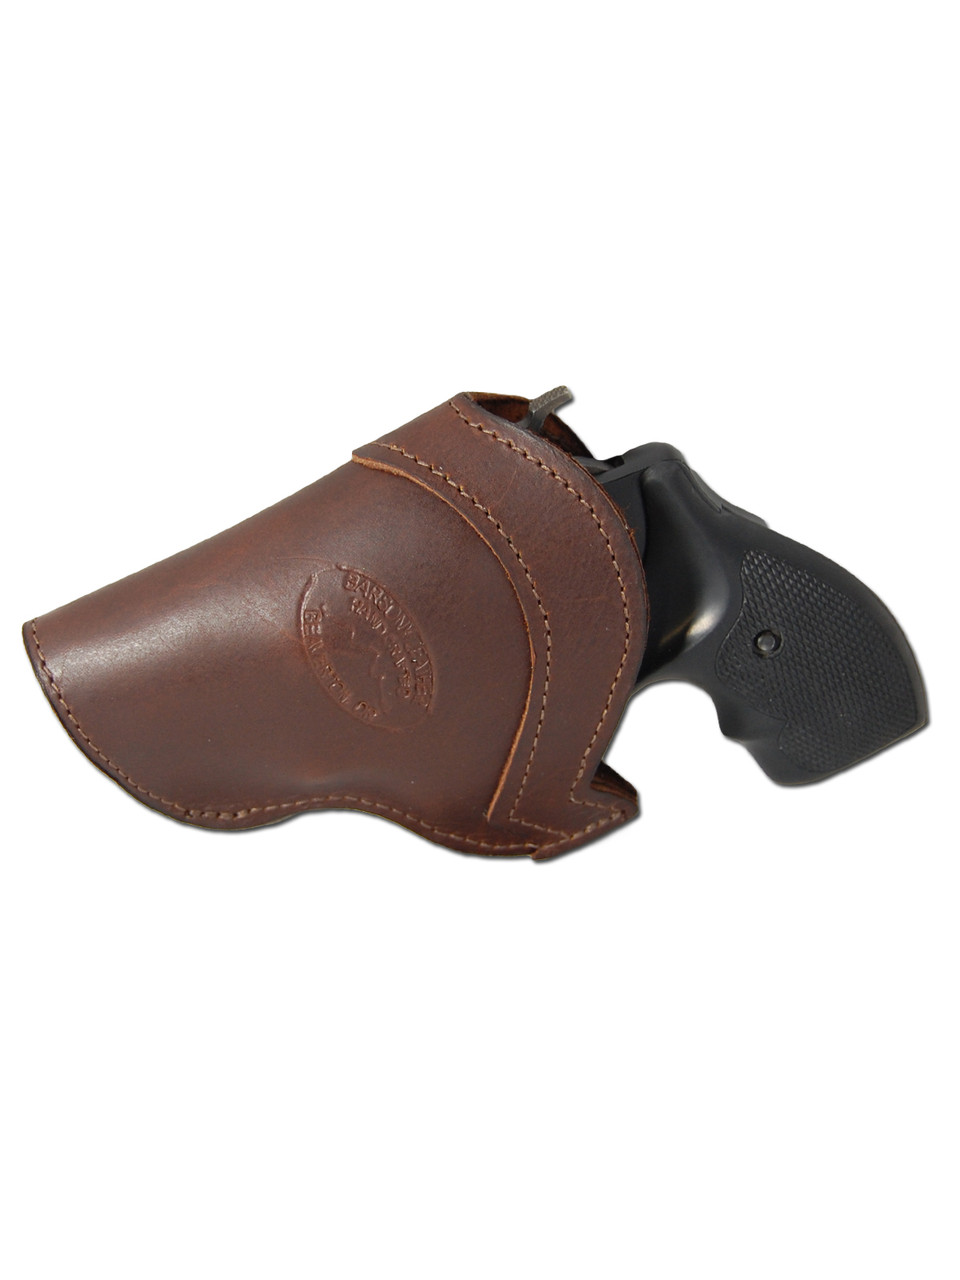 Brown Leather IWB Holster for EAA WINDICATOR right